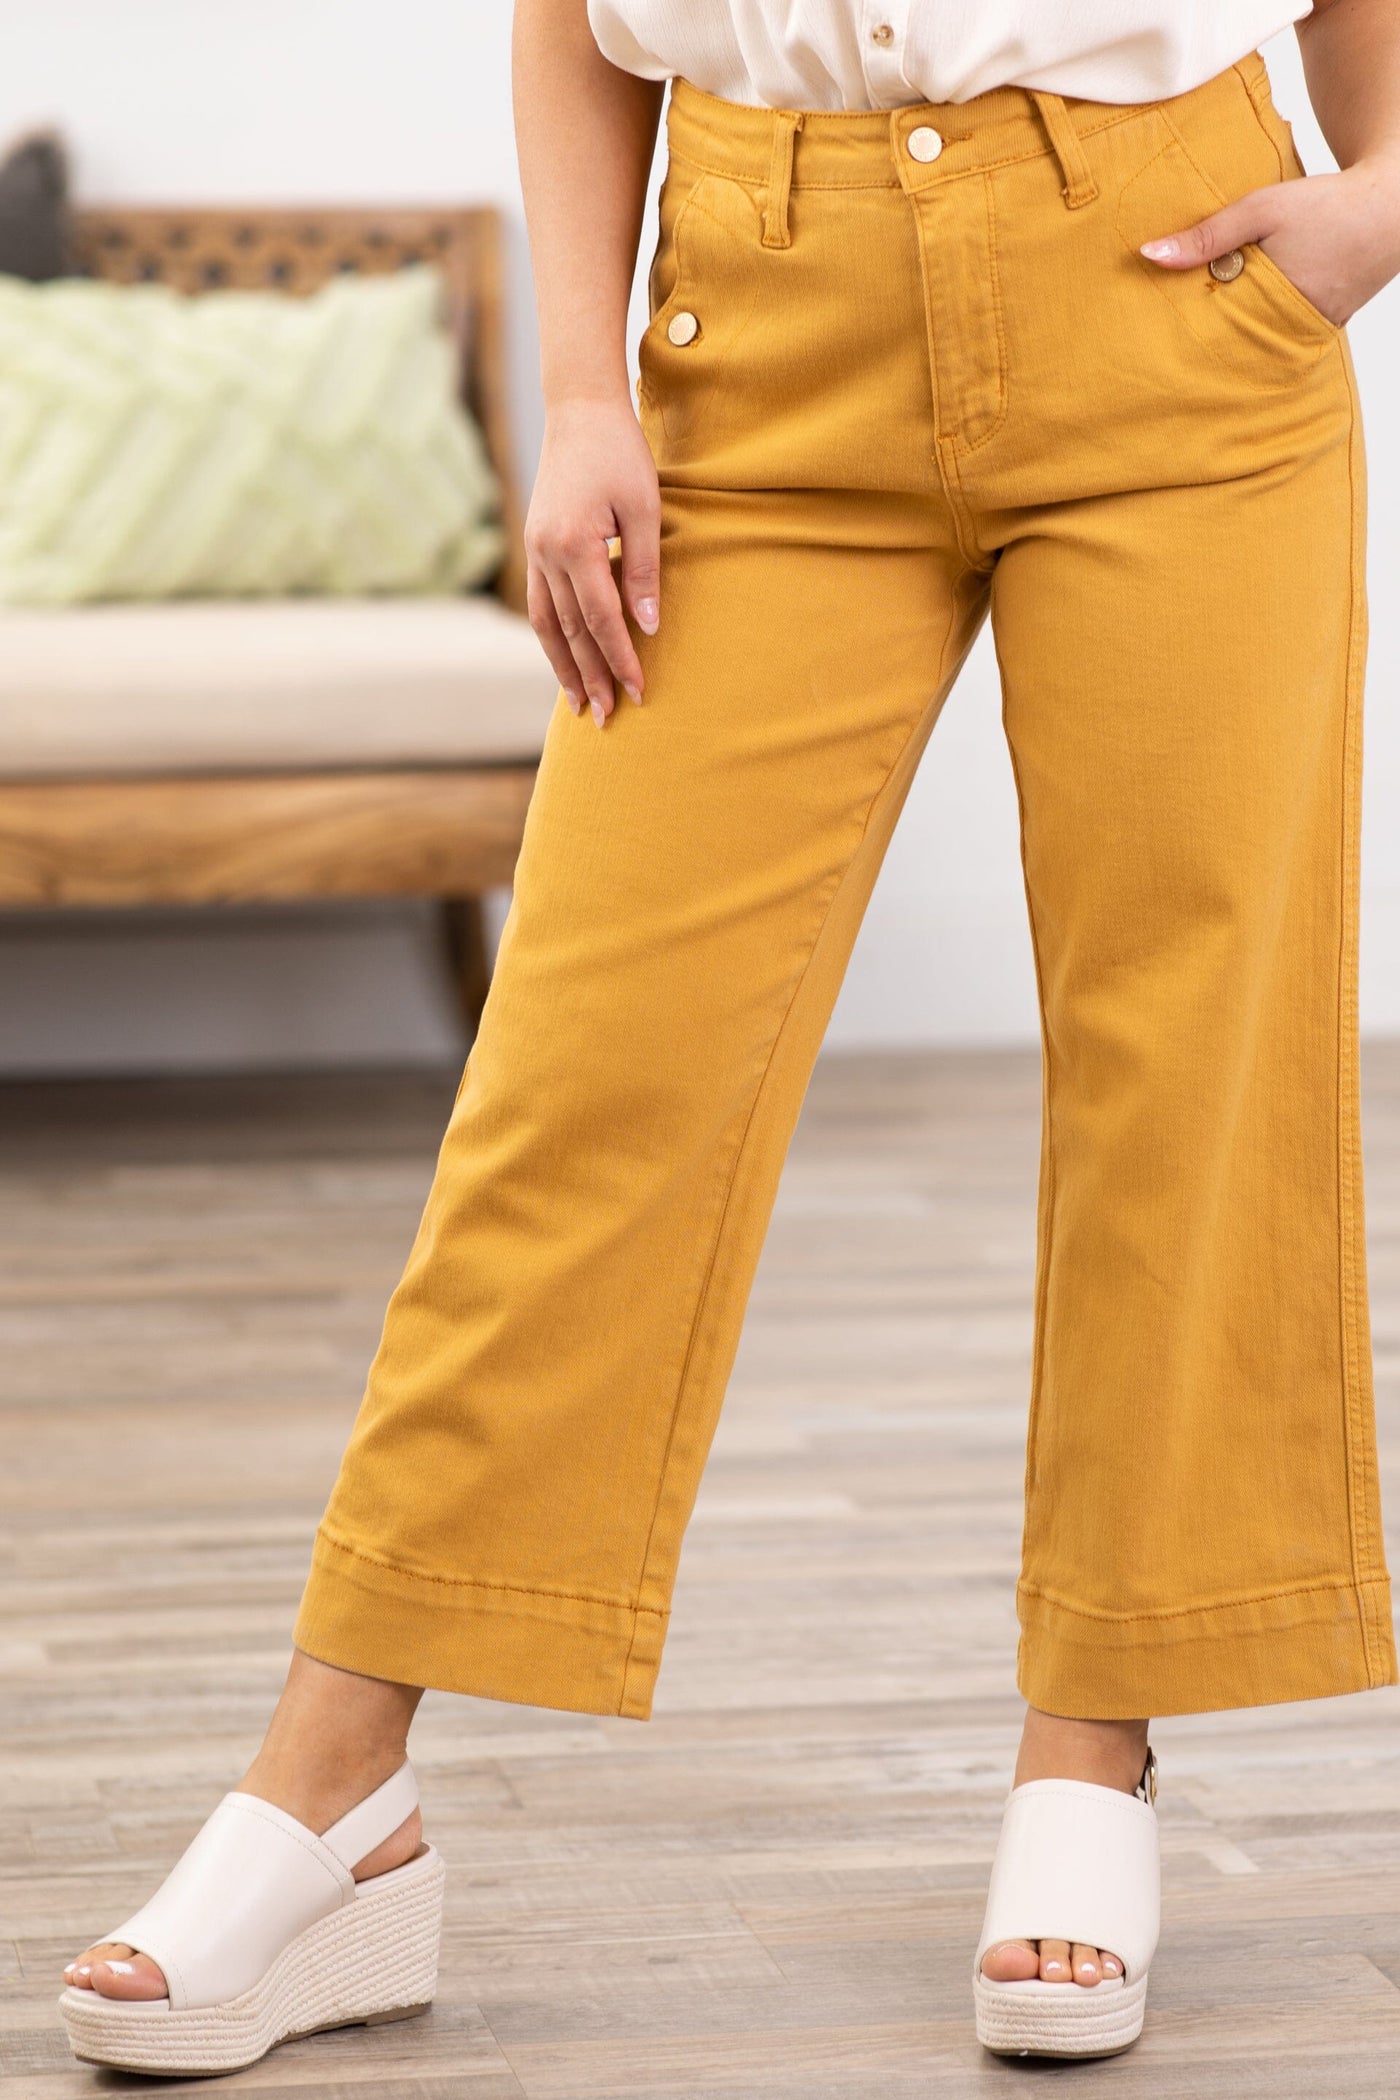 Judy Blue Mustard Cropped Wide Leg Pants - Filly Flair